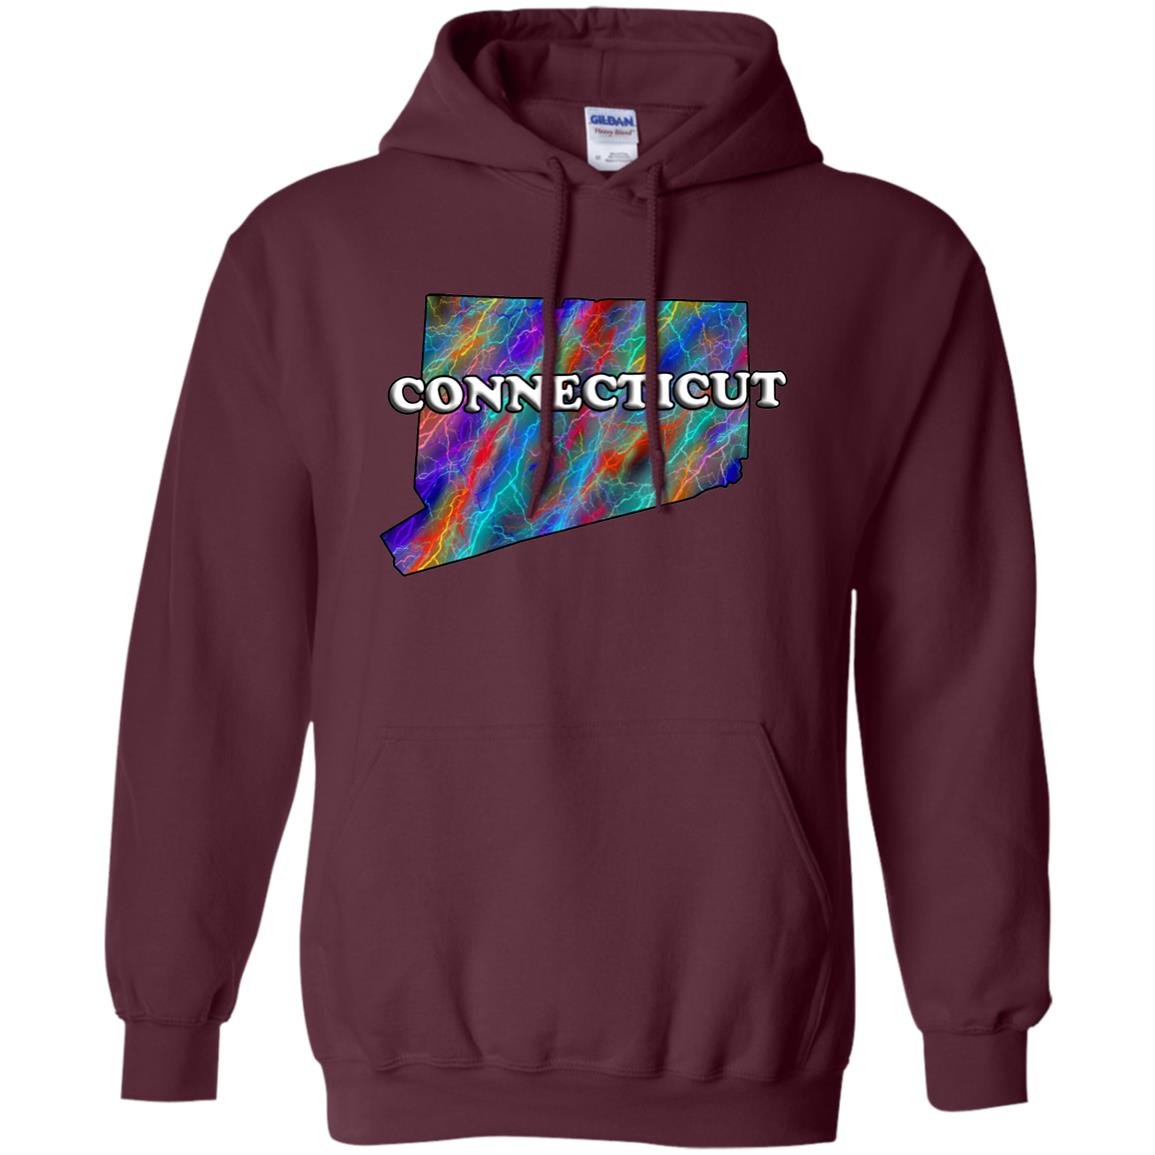 Connecticut State Hoodie